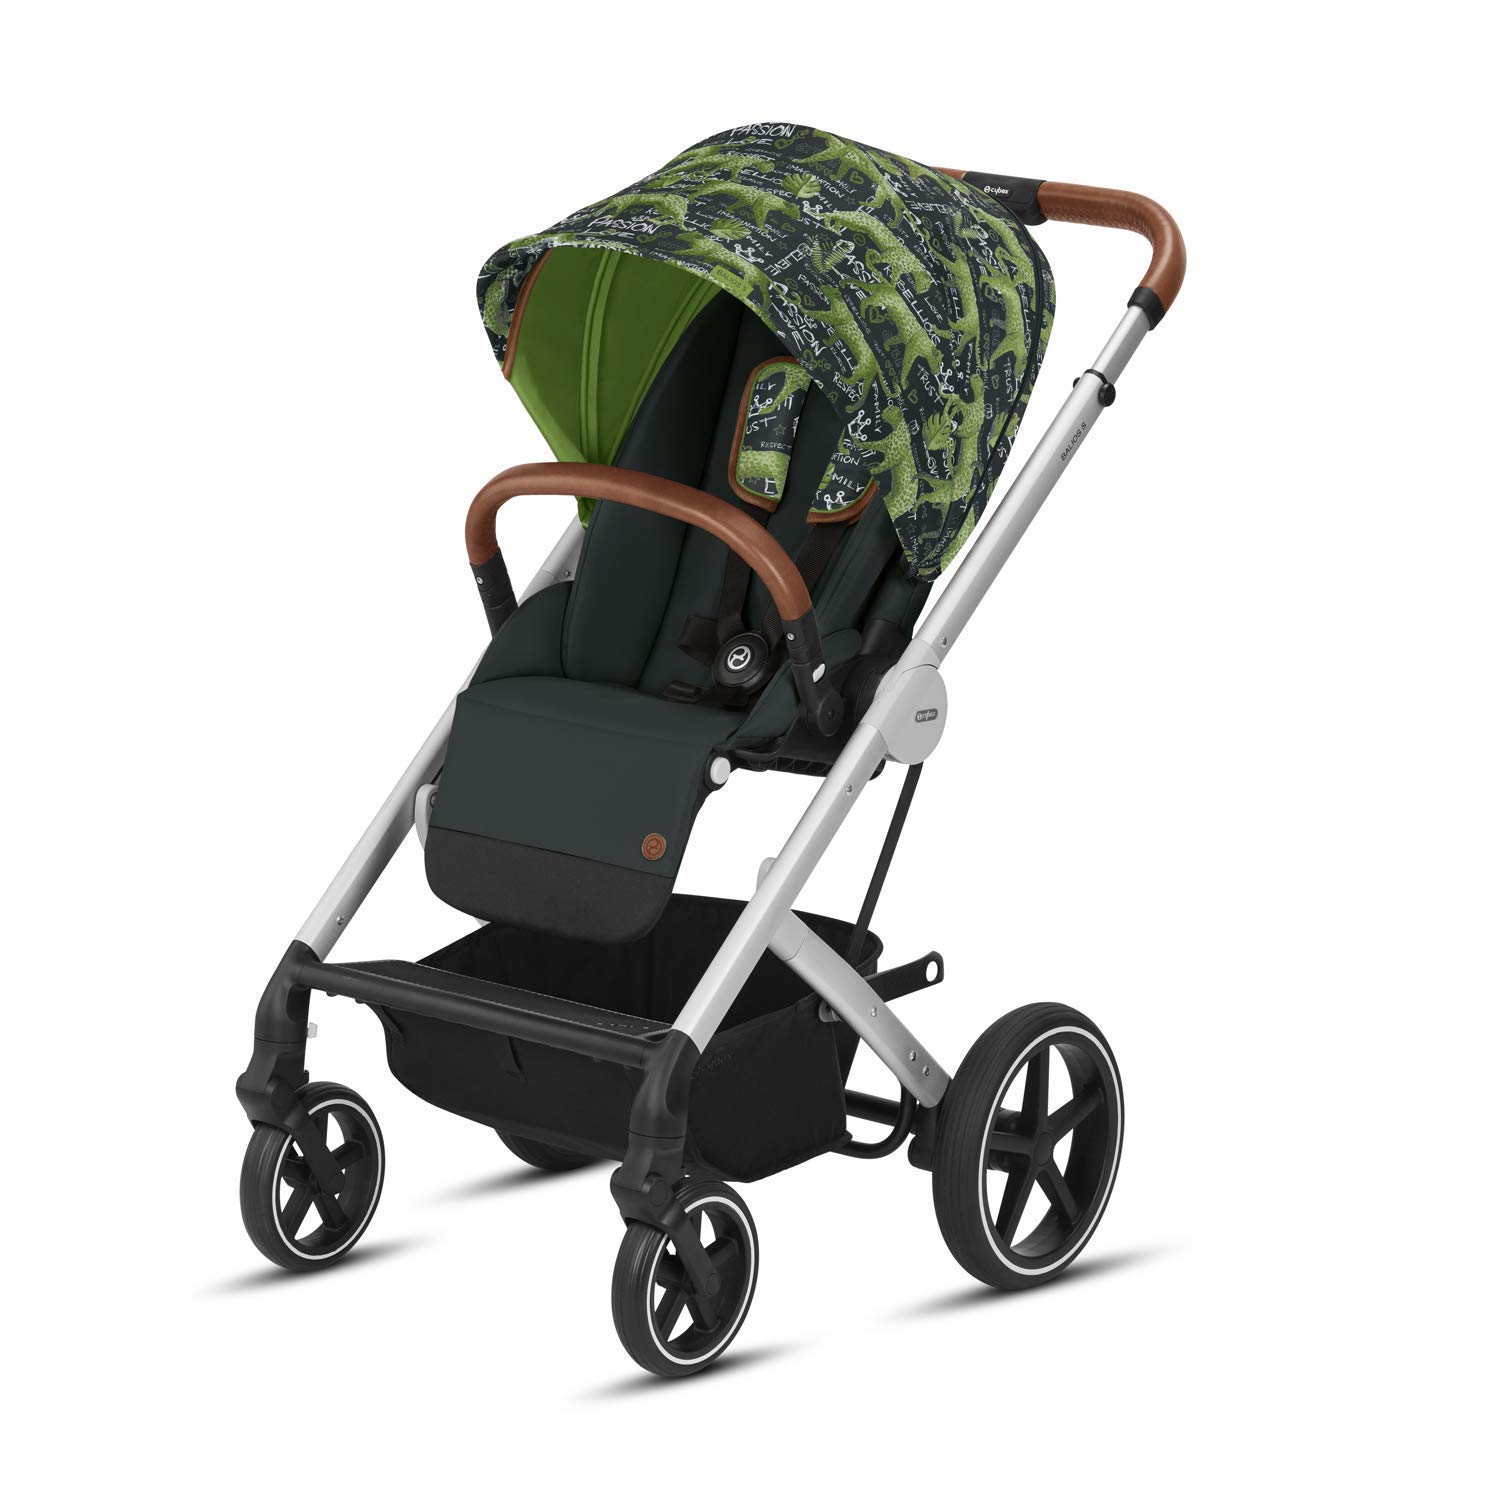 Cybex Gold 519000409 Cybex Gold Jacket S Pushchair Suitable From Birth, Collection 2019 Respect Green